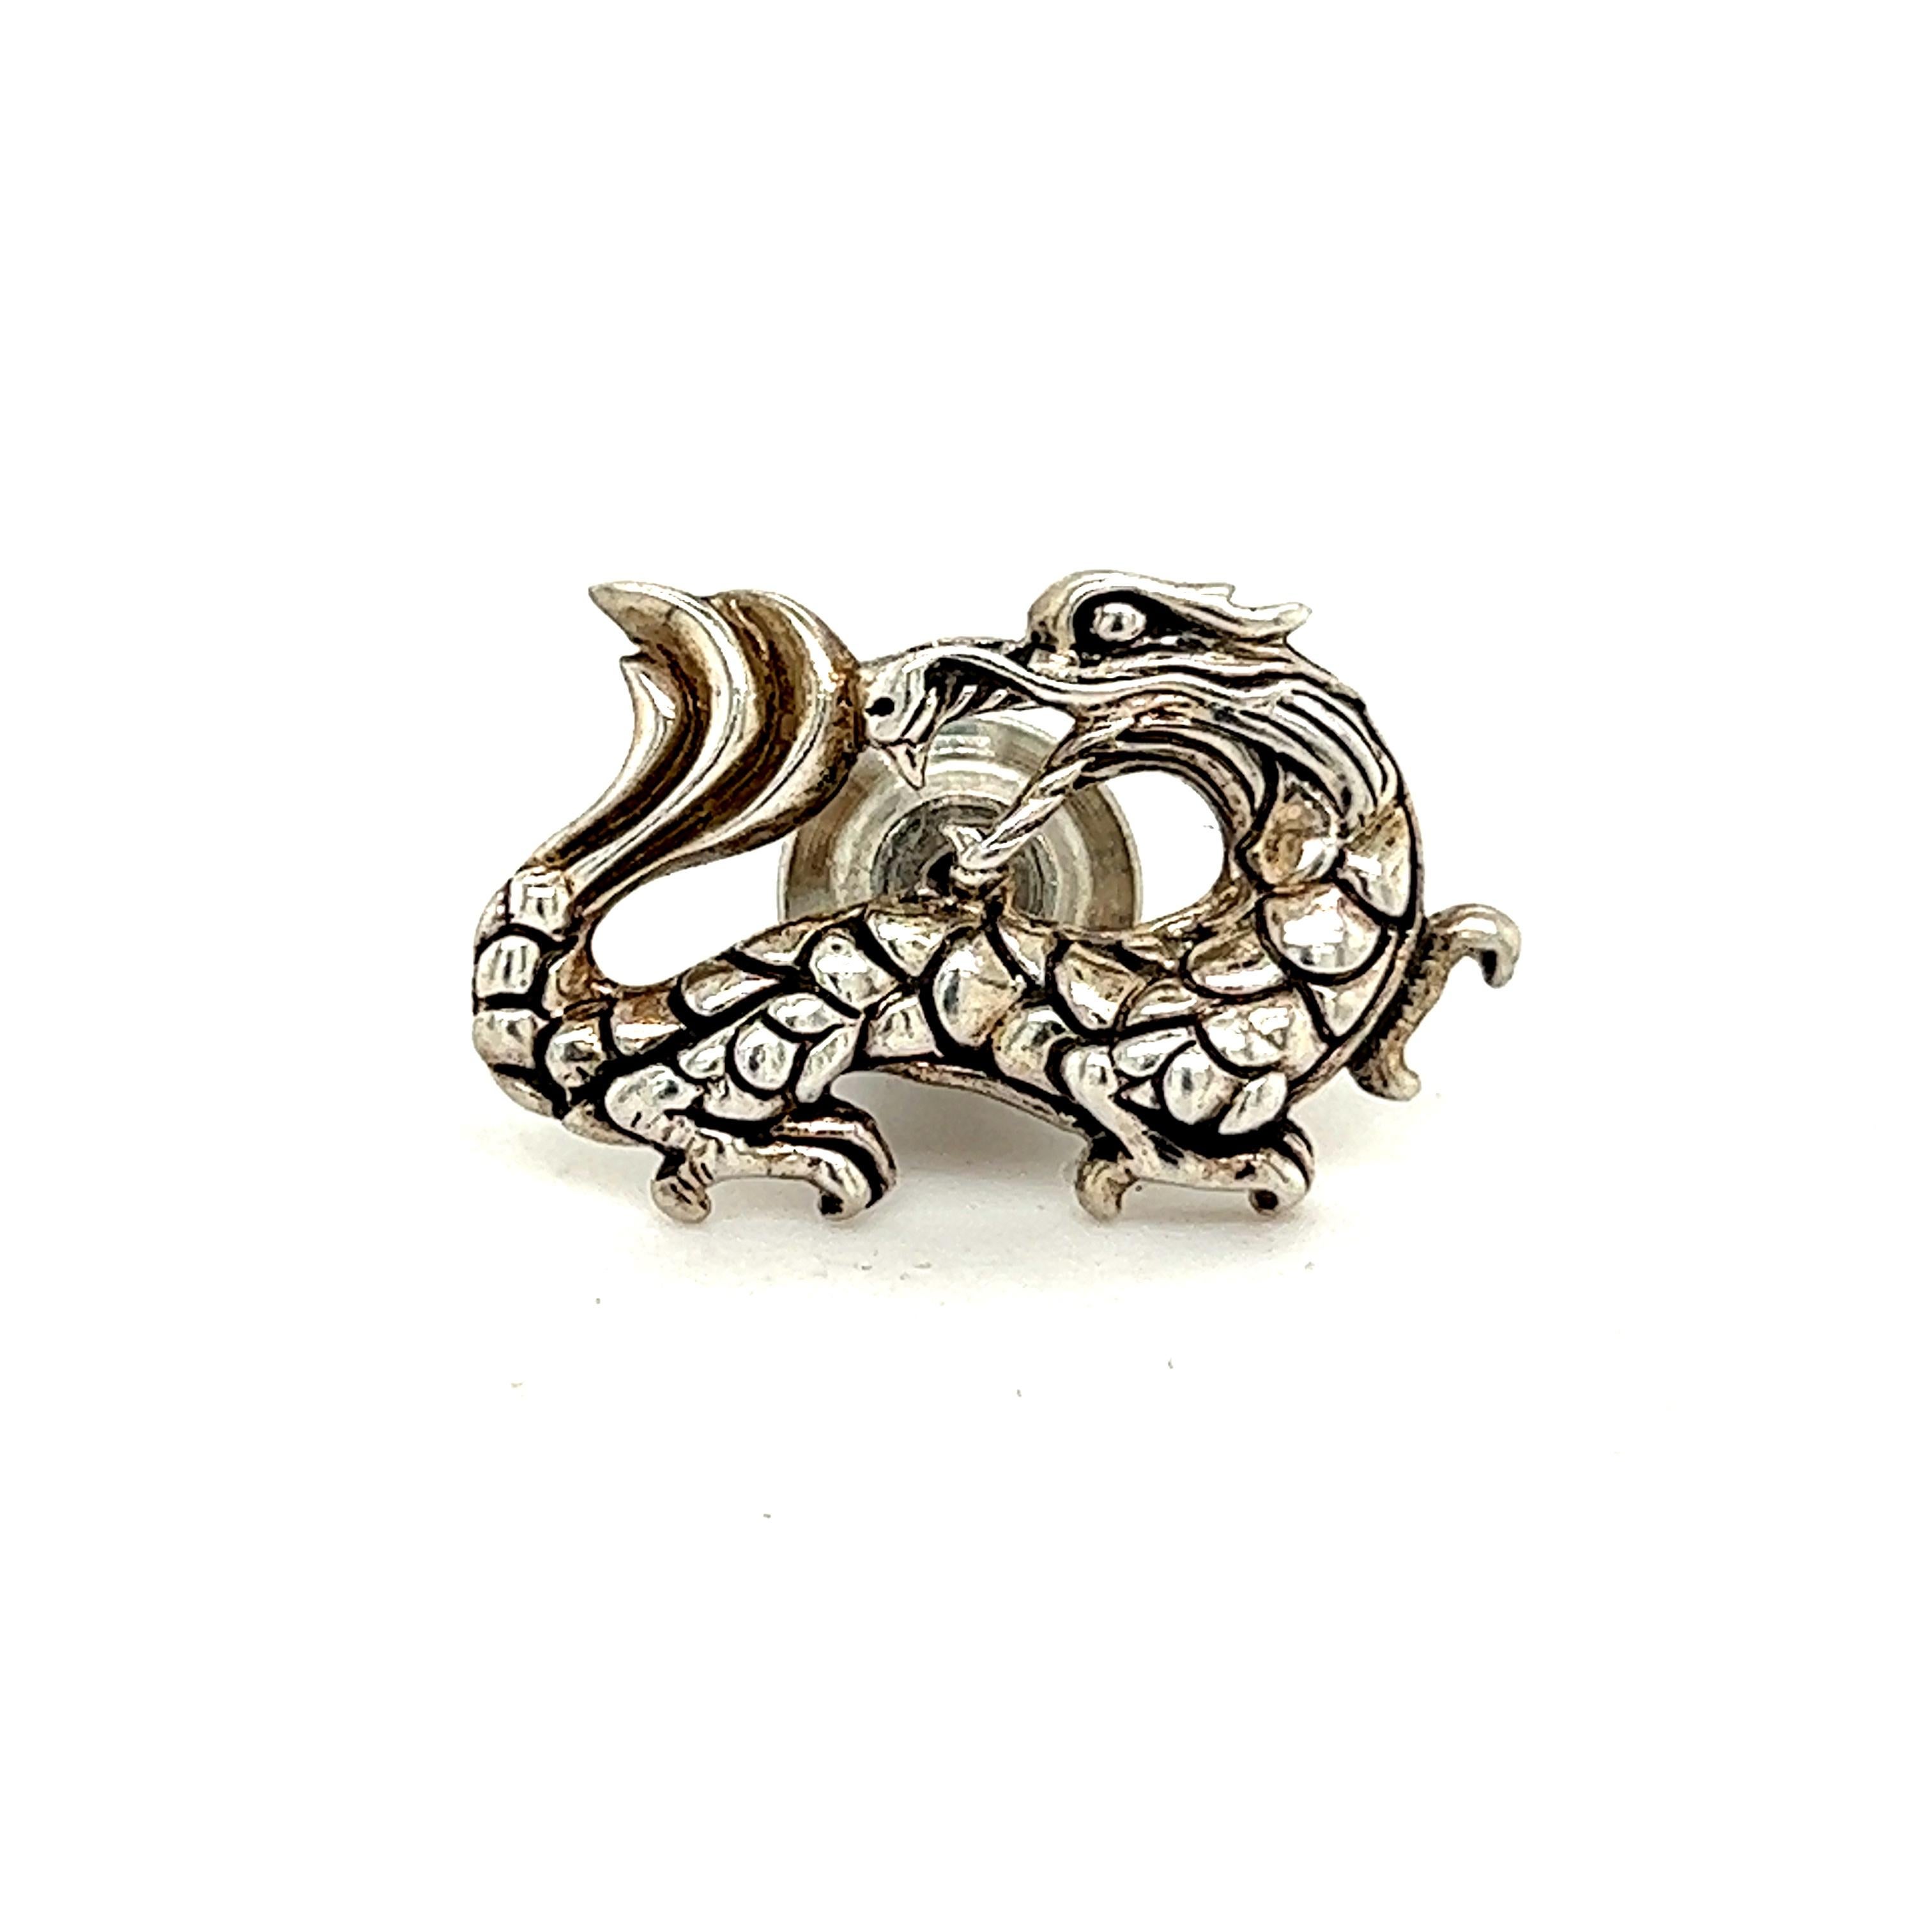 John Hardy Estate Dragon Brooch Pin Sterling Silver JH34

TRUSTED SELLER SINCE 2002

PLEASE SEE OUR HUNDREDS OF POSITIVE FEEDBACKS FROM OUR CLIENTS!!

FREE SHIPPING!!

DETAILS
Style: Dragon brooch
Weight: 3.14 Grams
Metal: Sterling Silver

The John